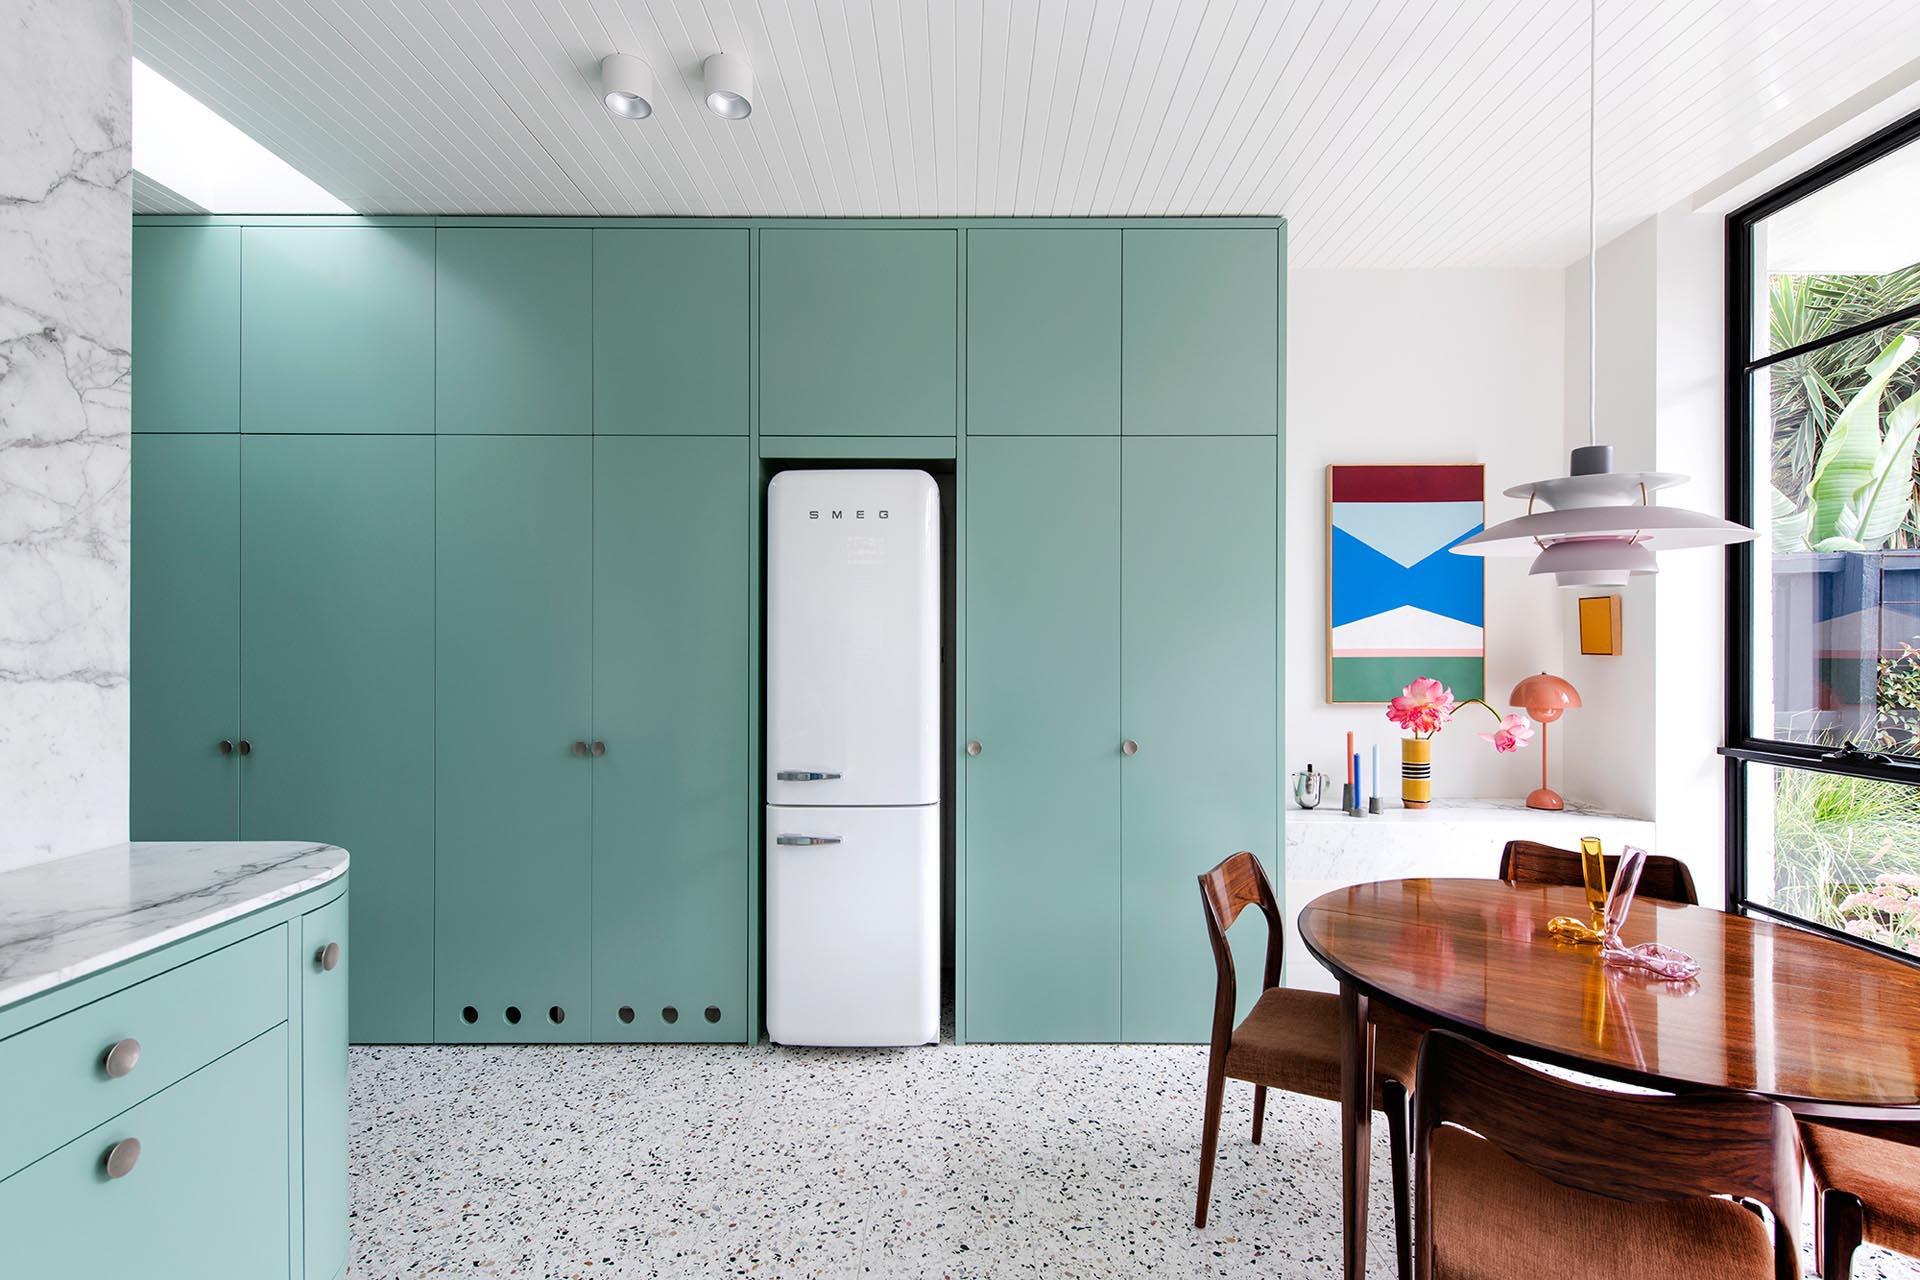 A modern mint green kitchen with Calacatta Statuario countertops, Terrazzo flooring, and white walls and ceiling.